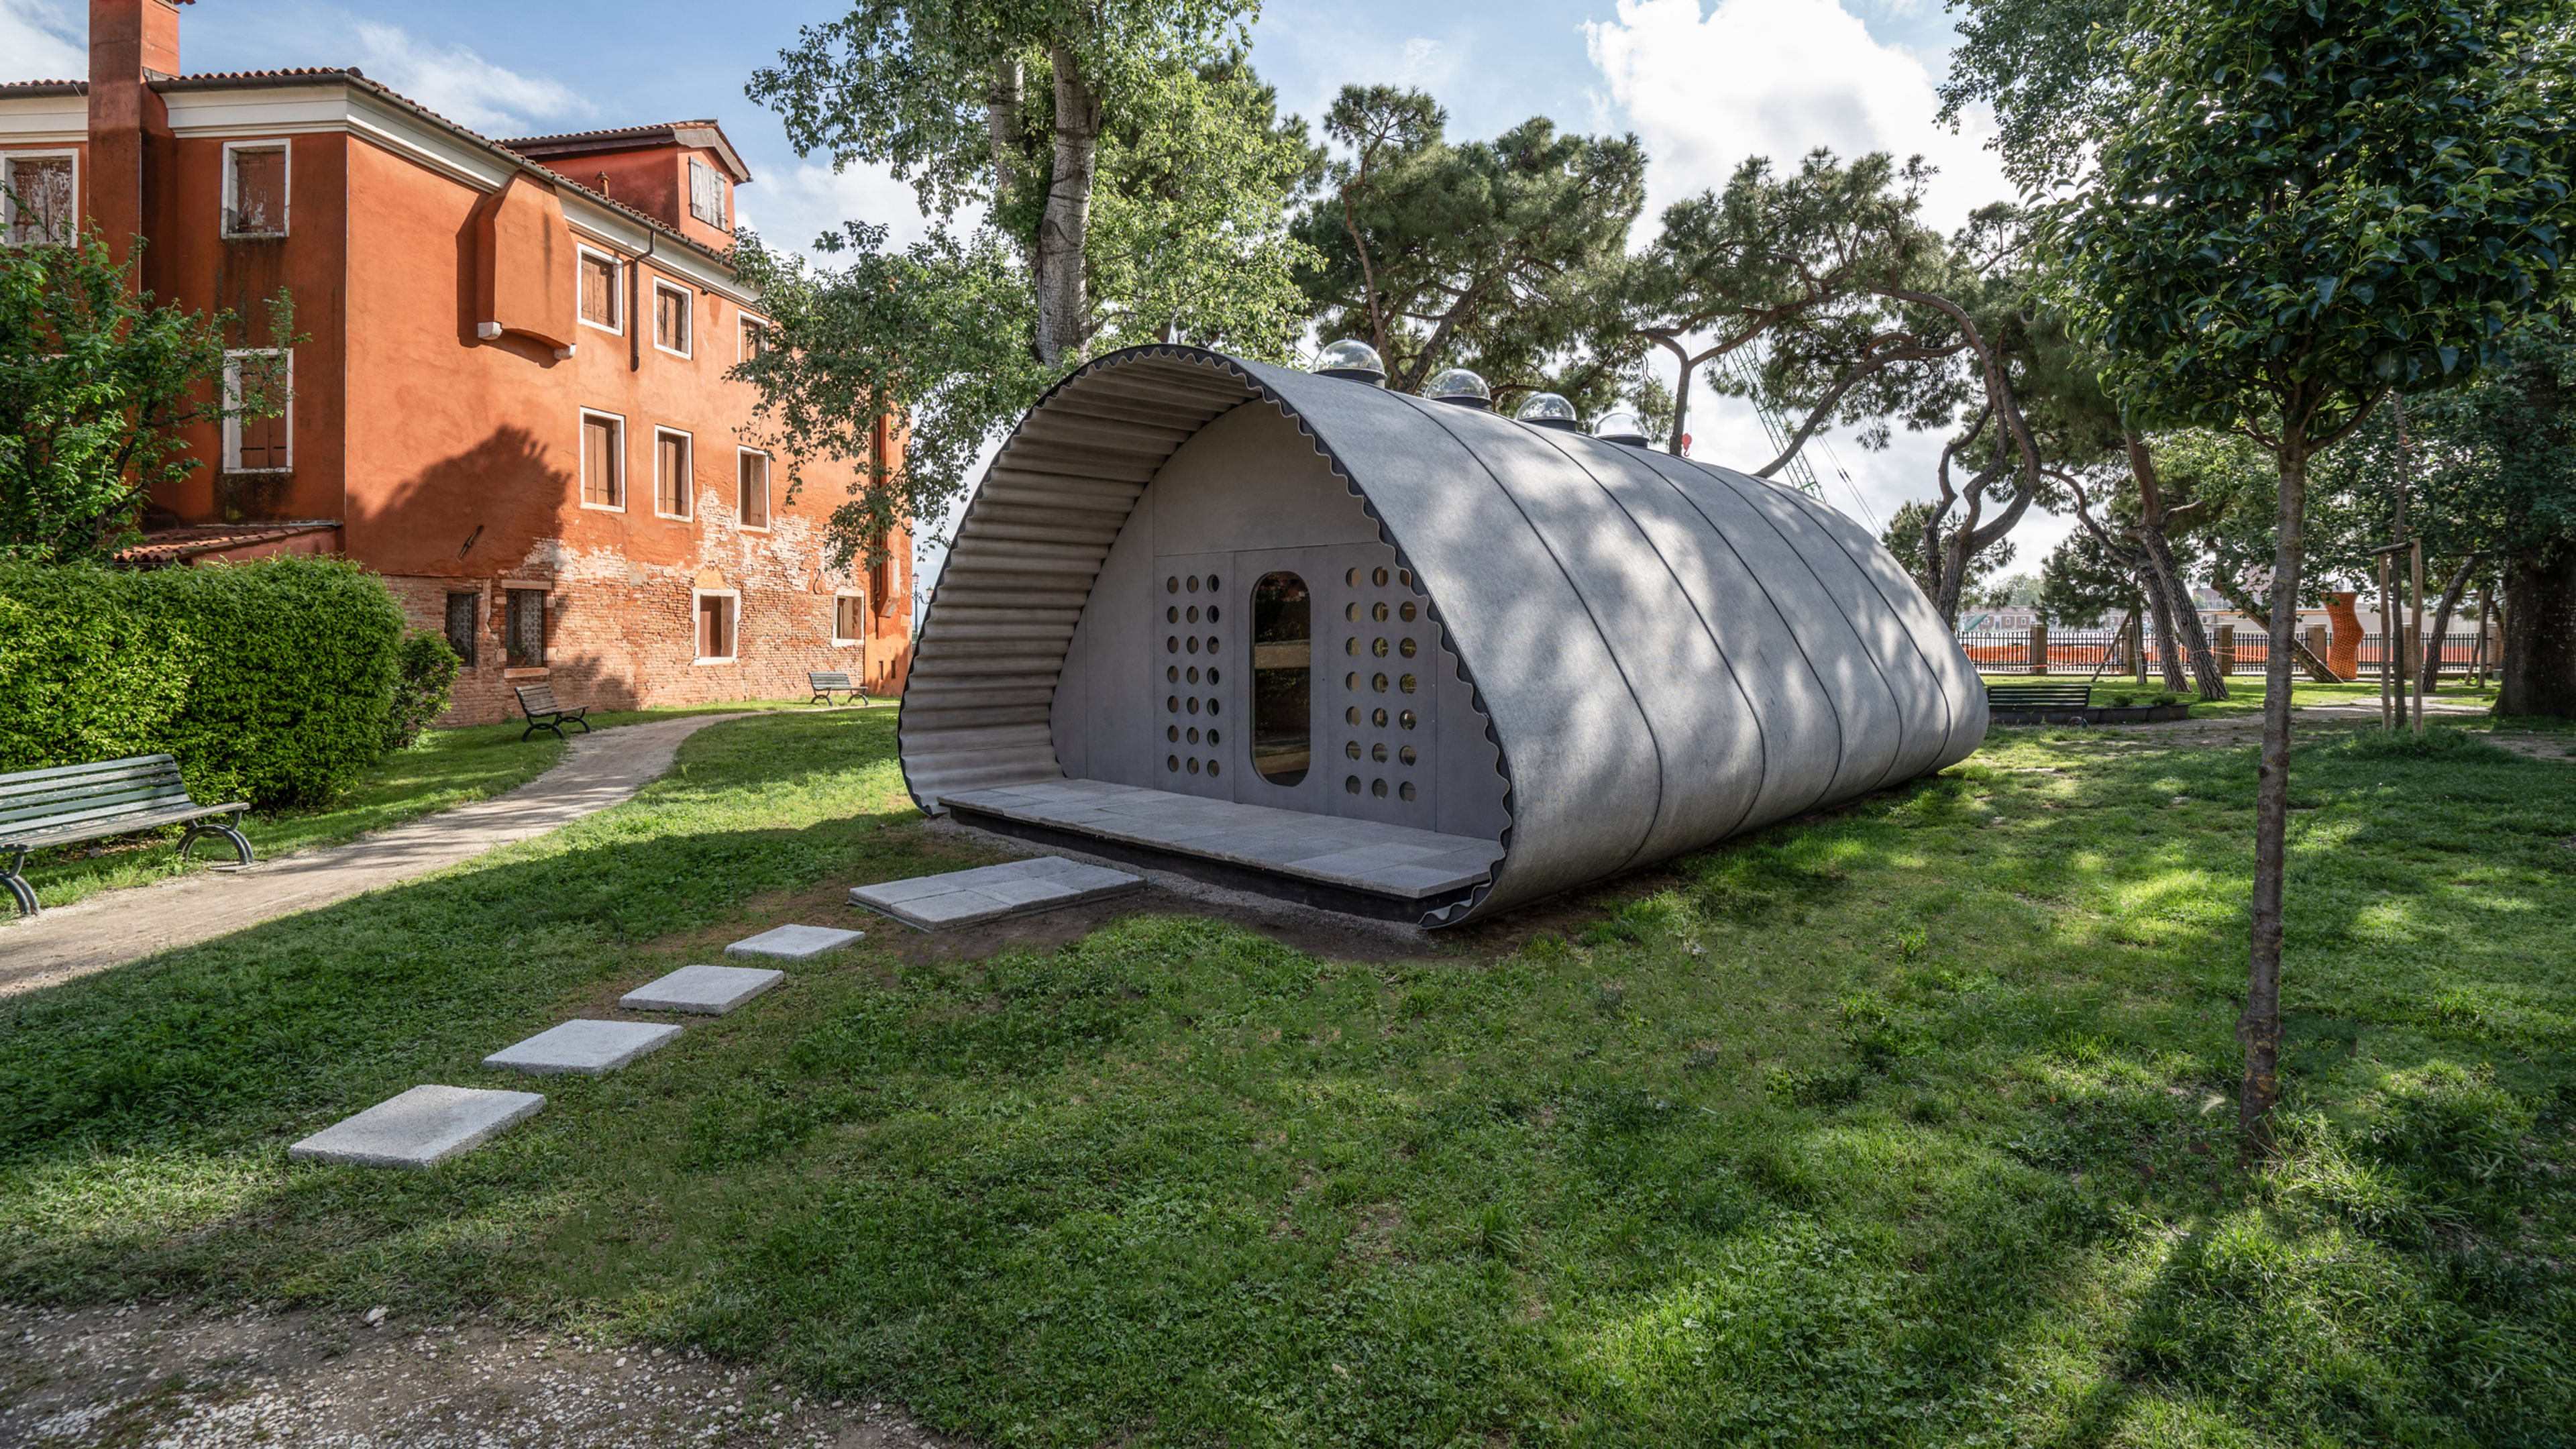 Norman Foster’s new vision for long-term refugee homes uses ‘rollable’ concrete